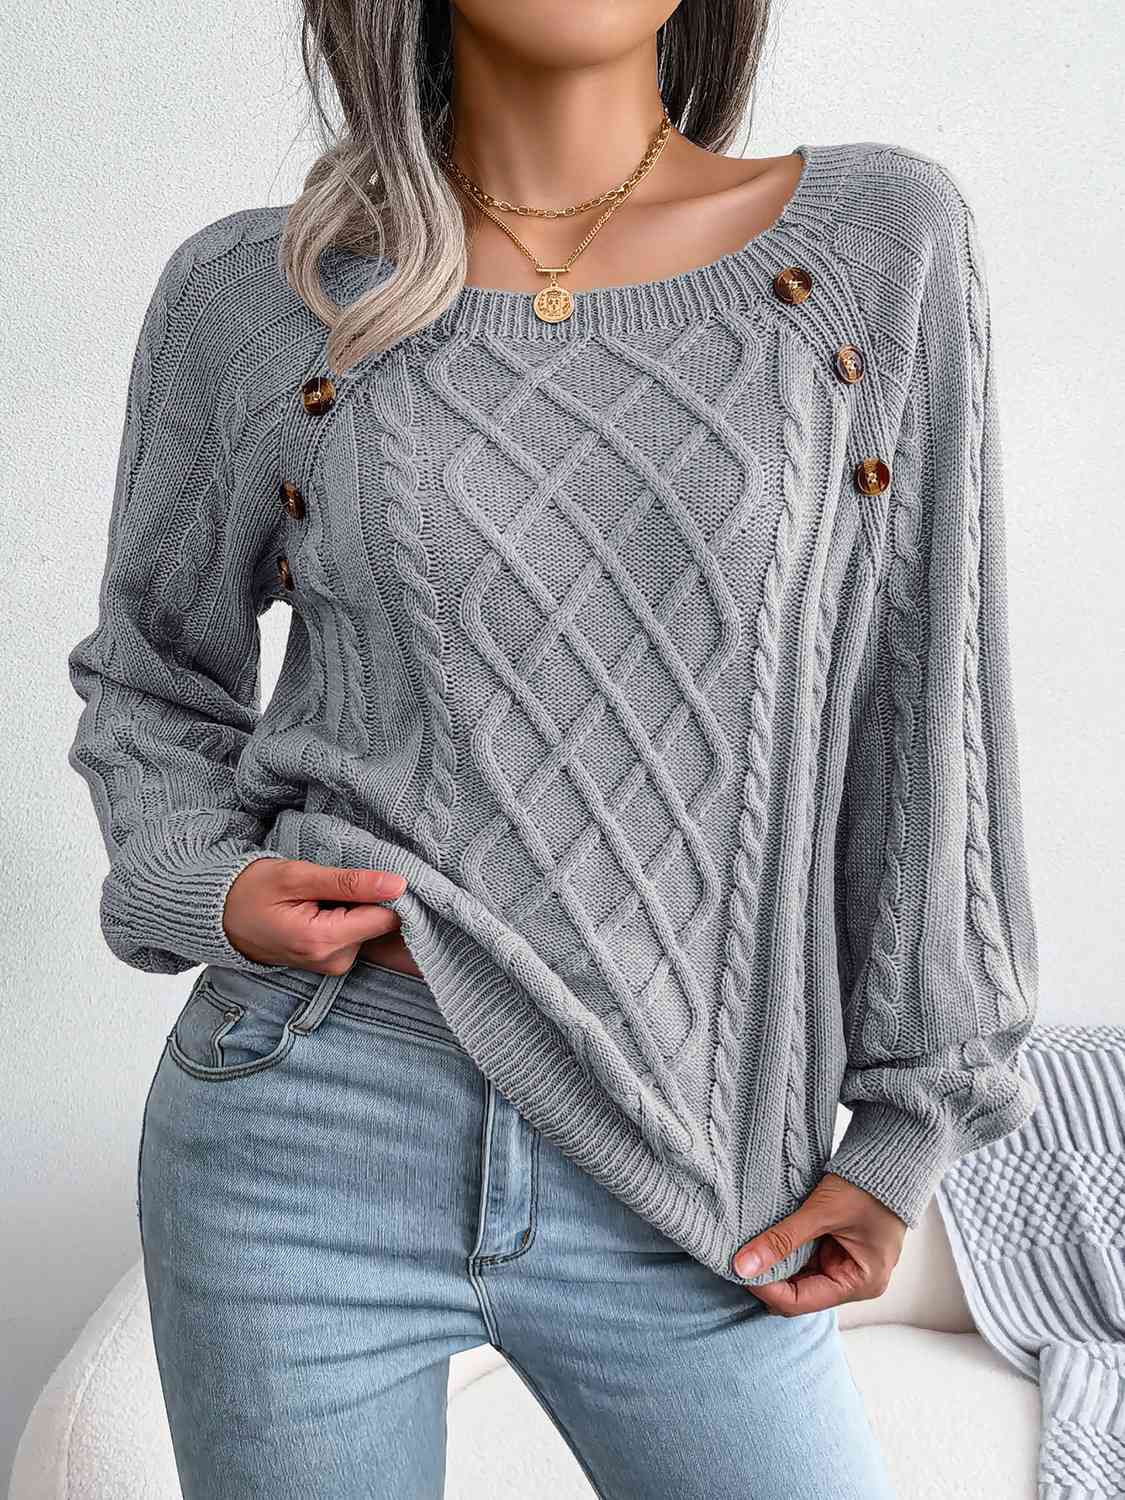 Fall Free Button Cable-Knit Sweater - Body By J'ne